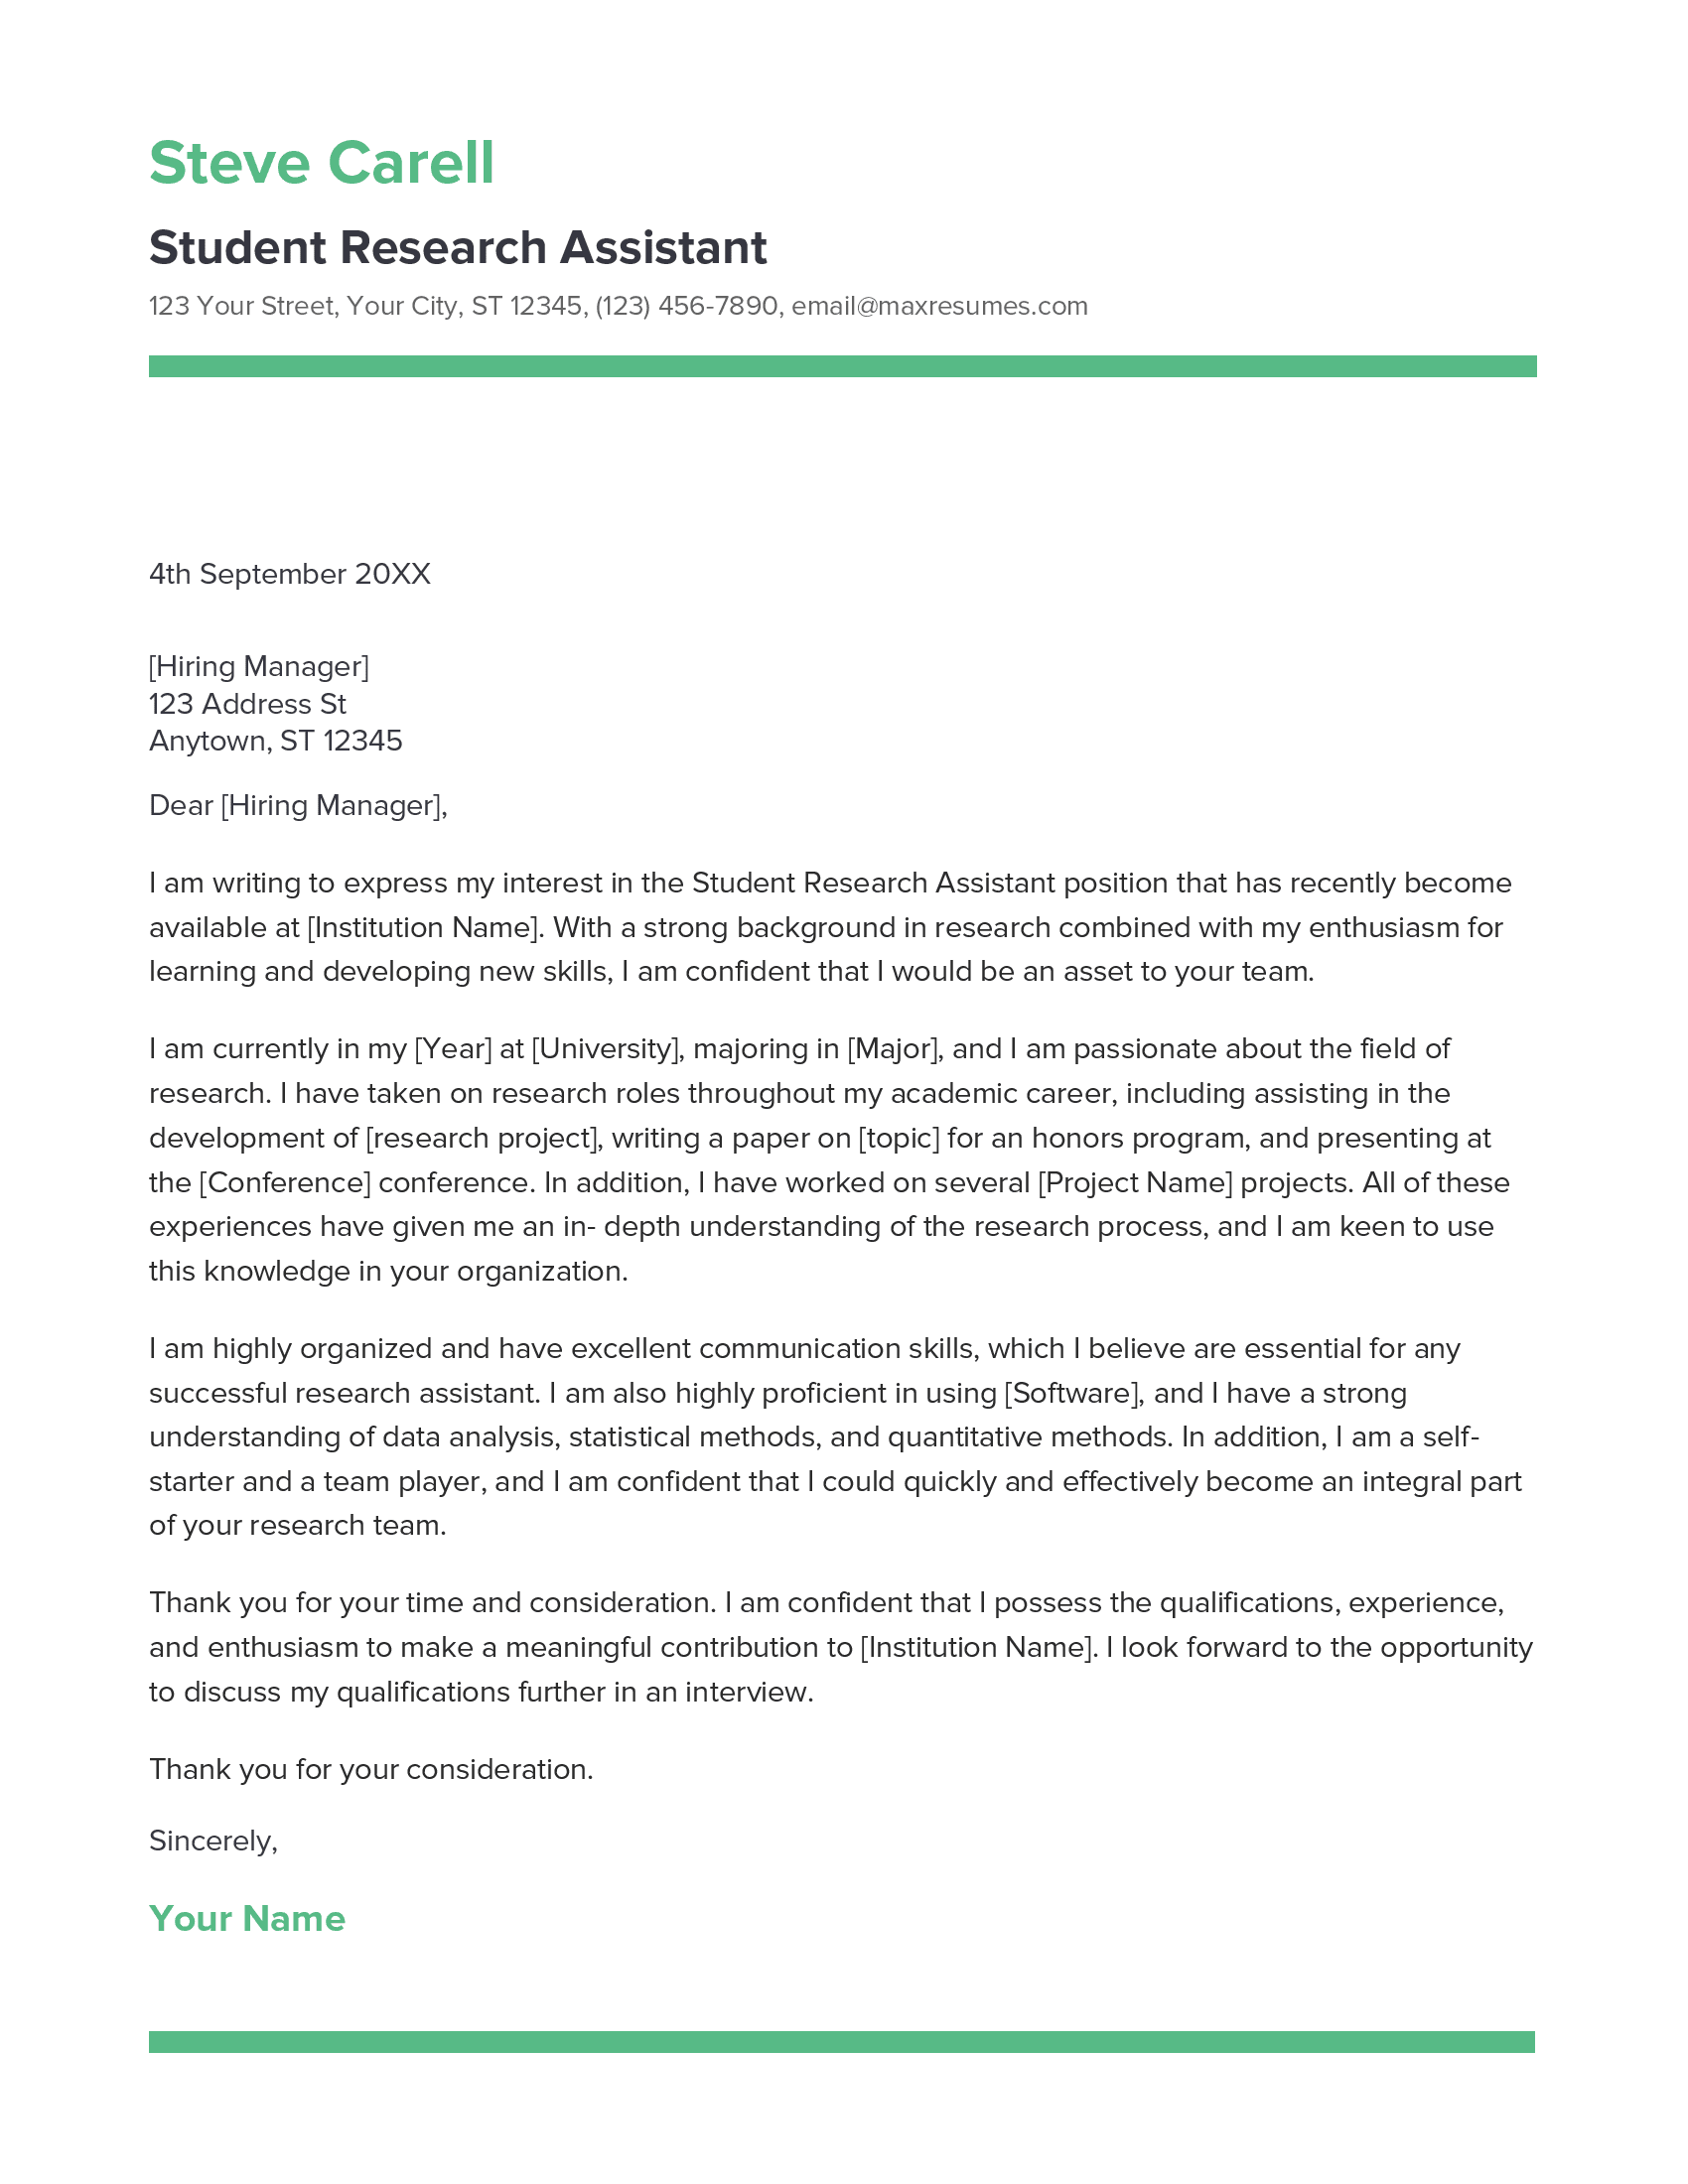 Student Research Assistant Cover Letter Example